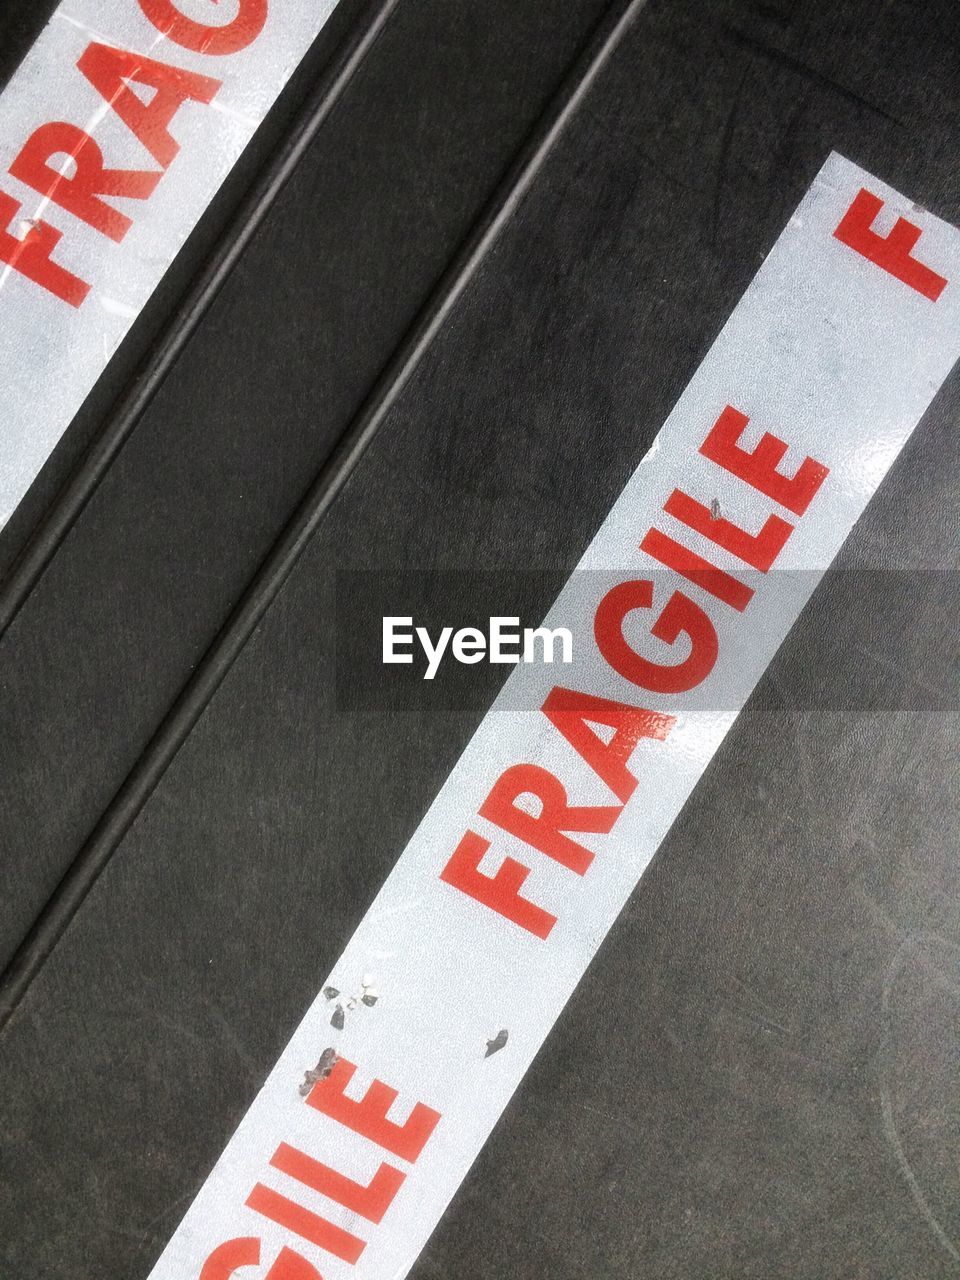 High angle view of fragile tape